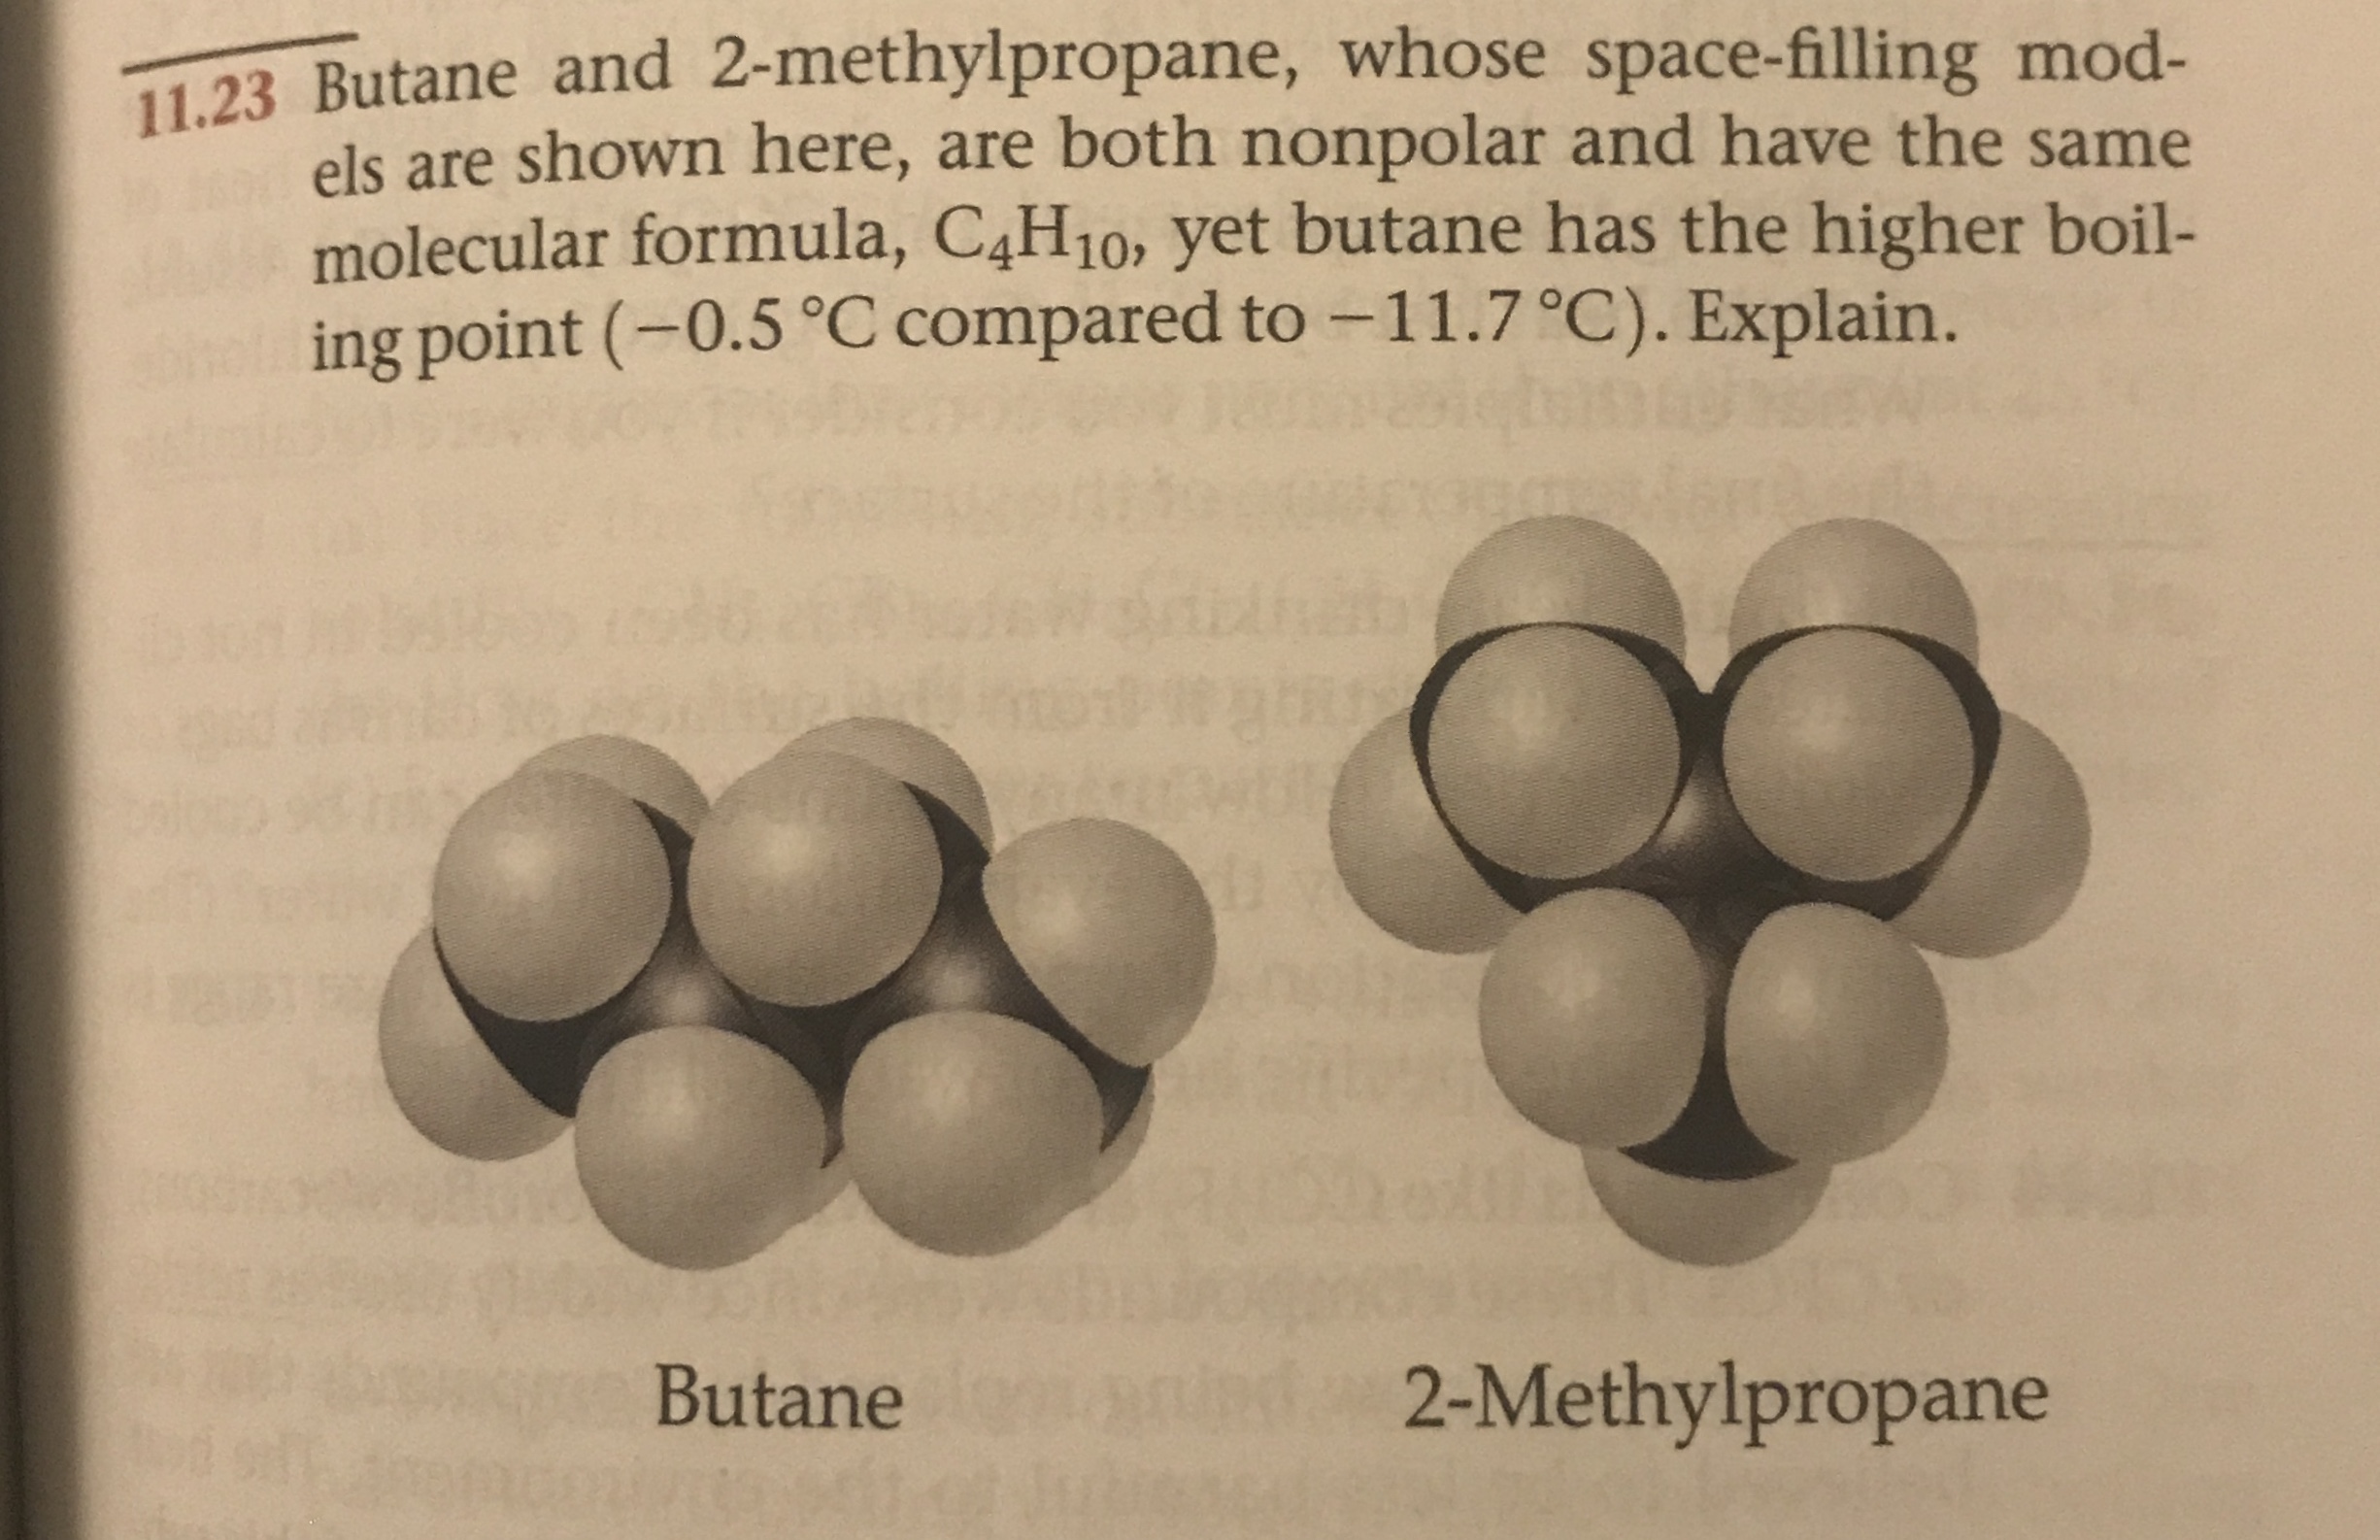 11.23 Butane and 2-methylpropane, whose space-filling mod-
els are shown here, are both nonpolar and have the same
molecular formula, C4H10, yet butane has the higher boil-
ing point (-0.5 °C compared to-11.7 °C). Explain.
2-Methylpropane
Butane
